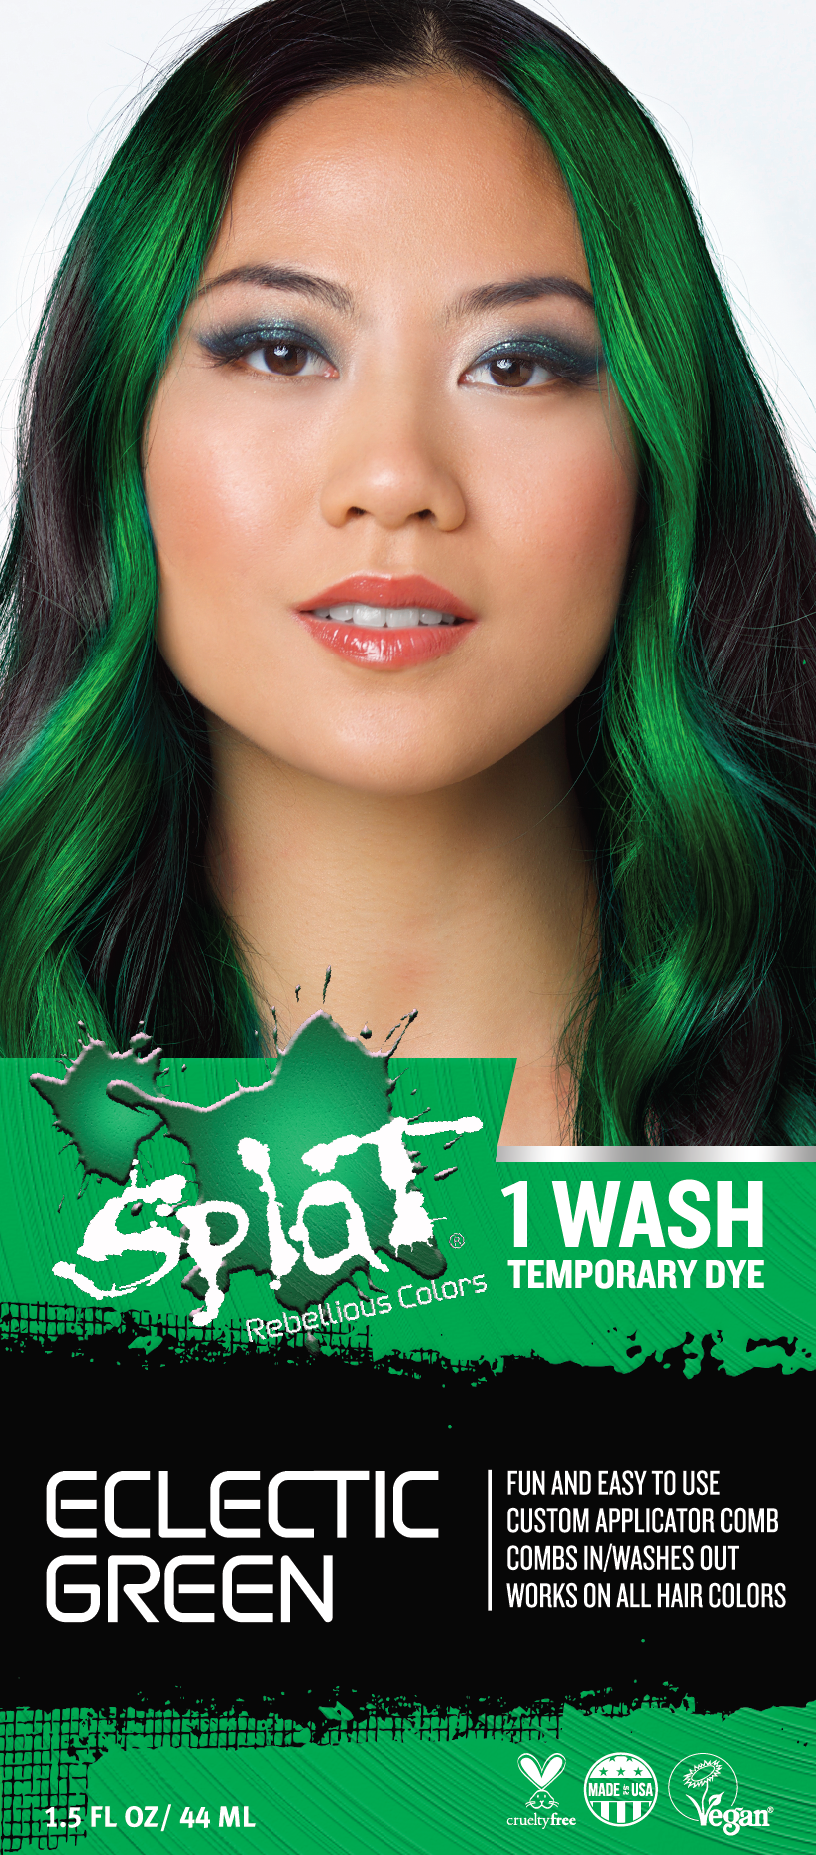 Splat 1 Wash Eclectic Green Hair Color, Temporary Bleach Free Green Hair Dye - image 1 of 8